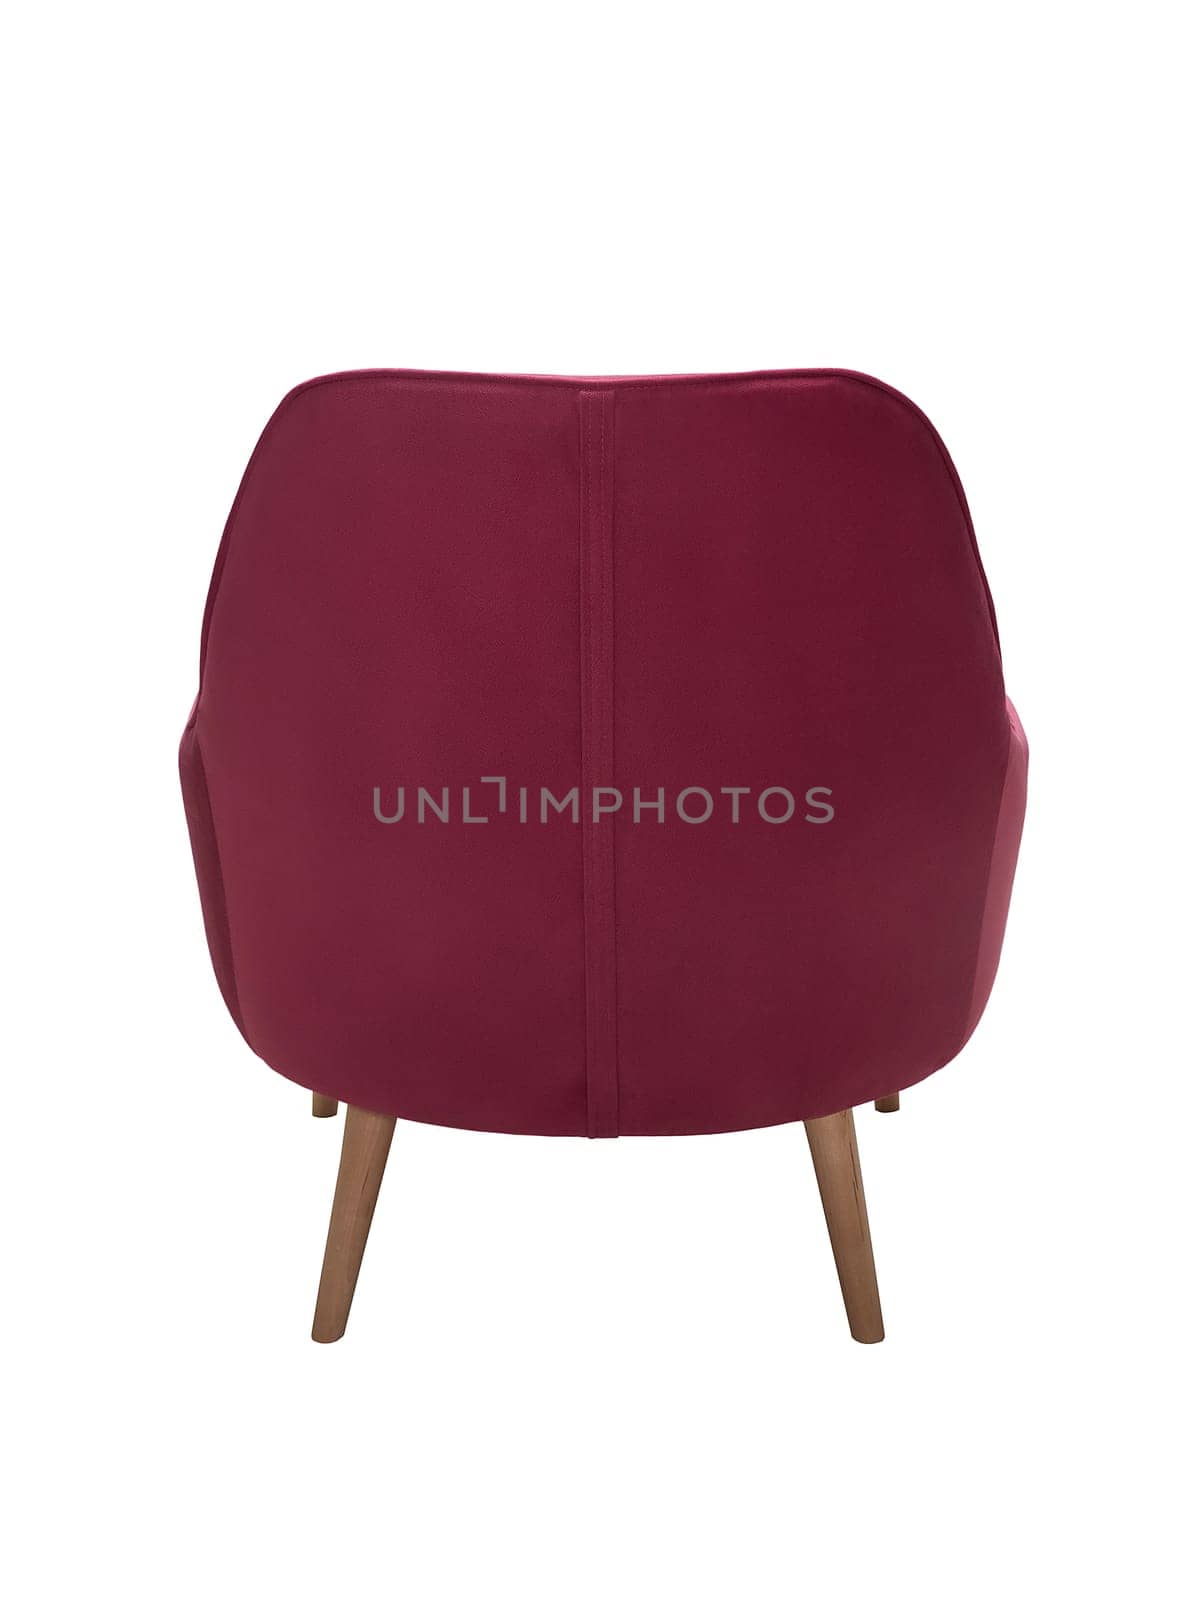 modern crimson fabric armchair with wooden legs isolated on white background, back view by artemzatsepilin